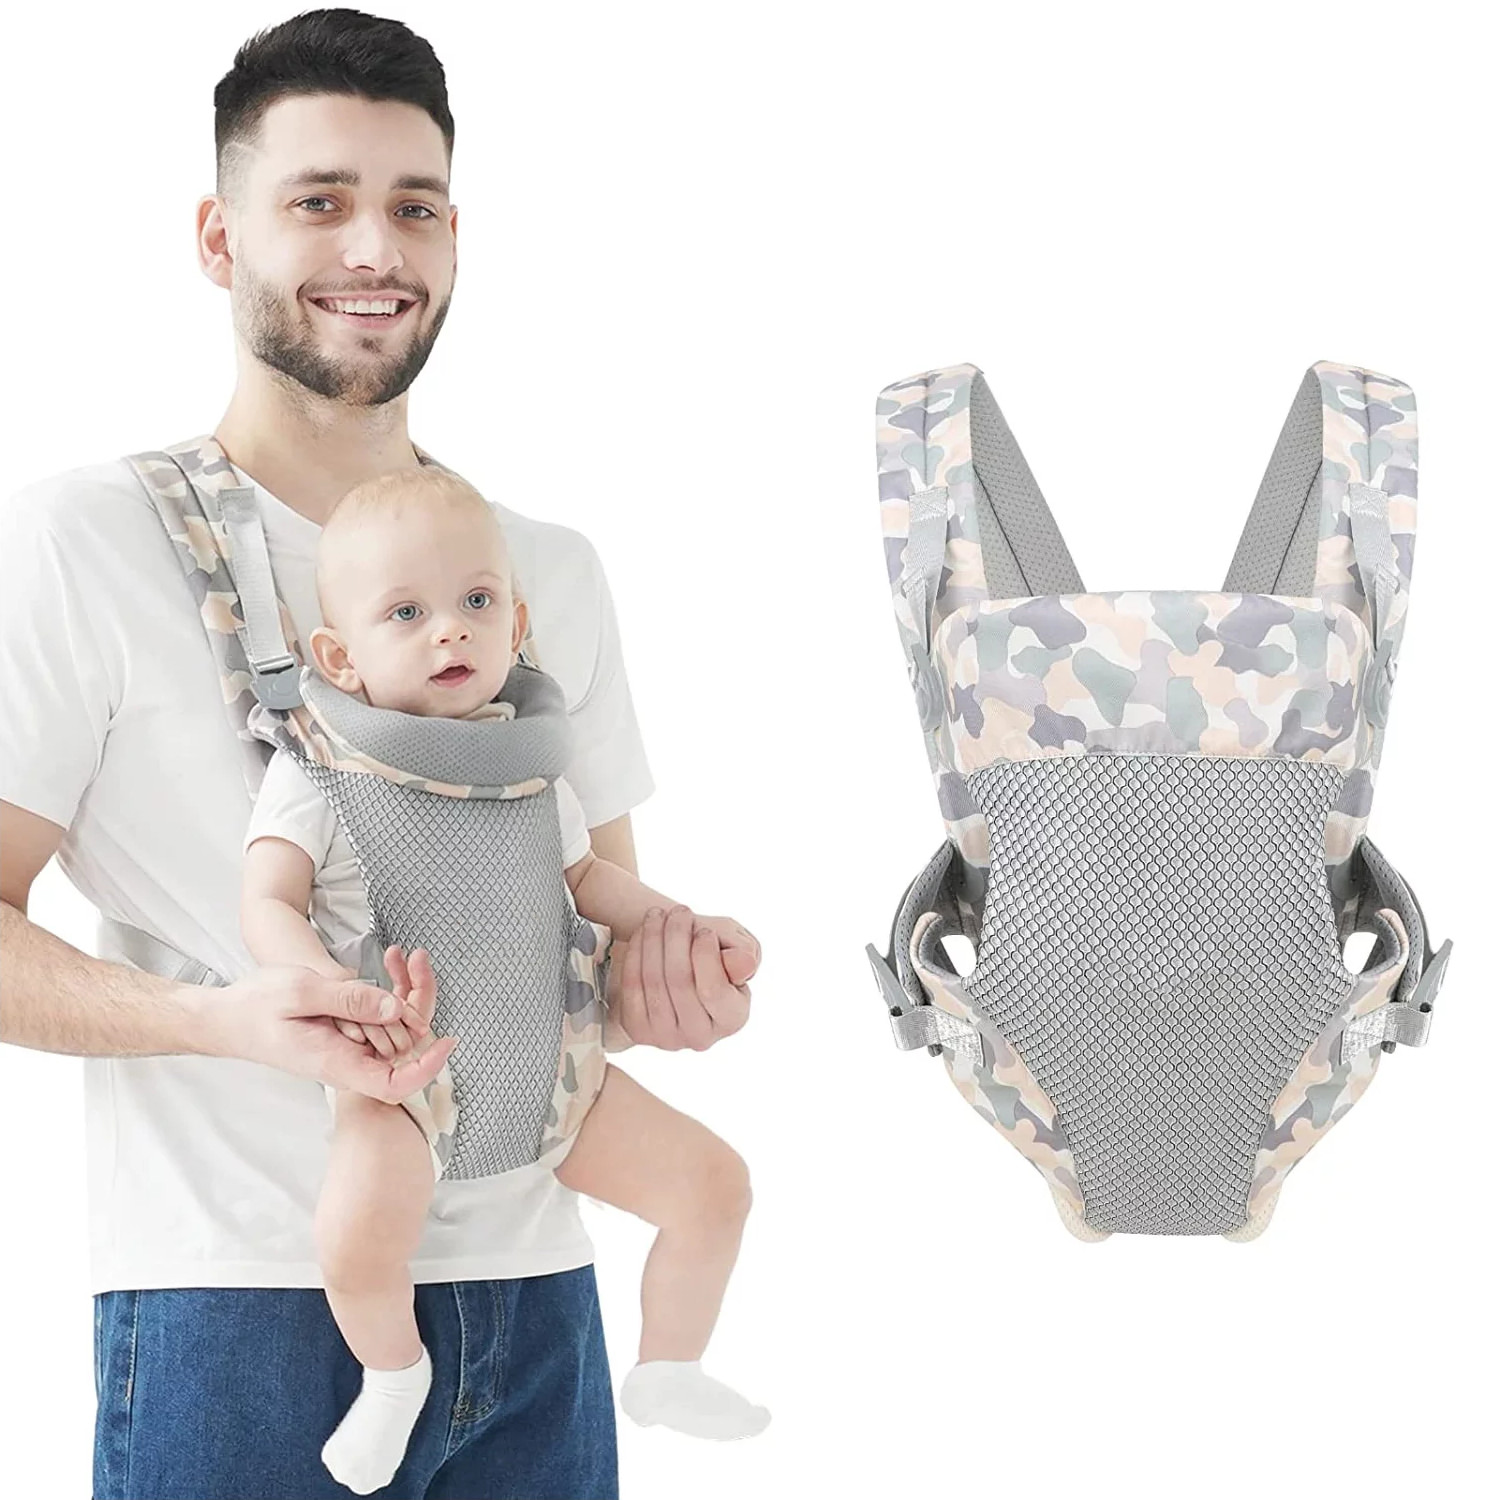 Yadala Baby Carrier, 4-in-1 Camouflage Baby Carrier, Front and Back Baby Sling with Adjustable Holder - image 1 of 8